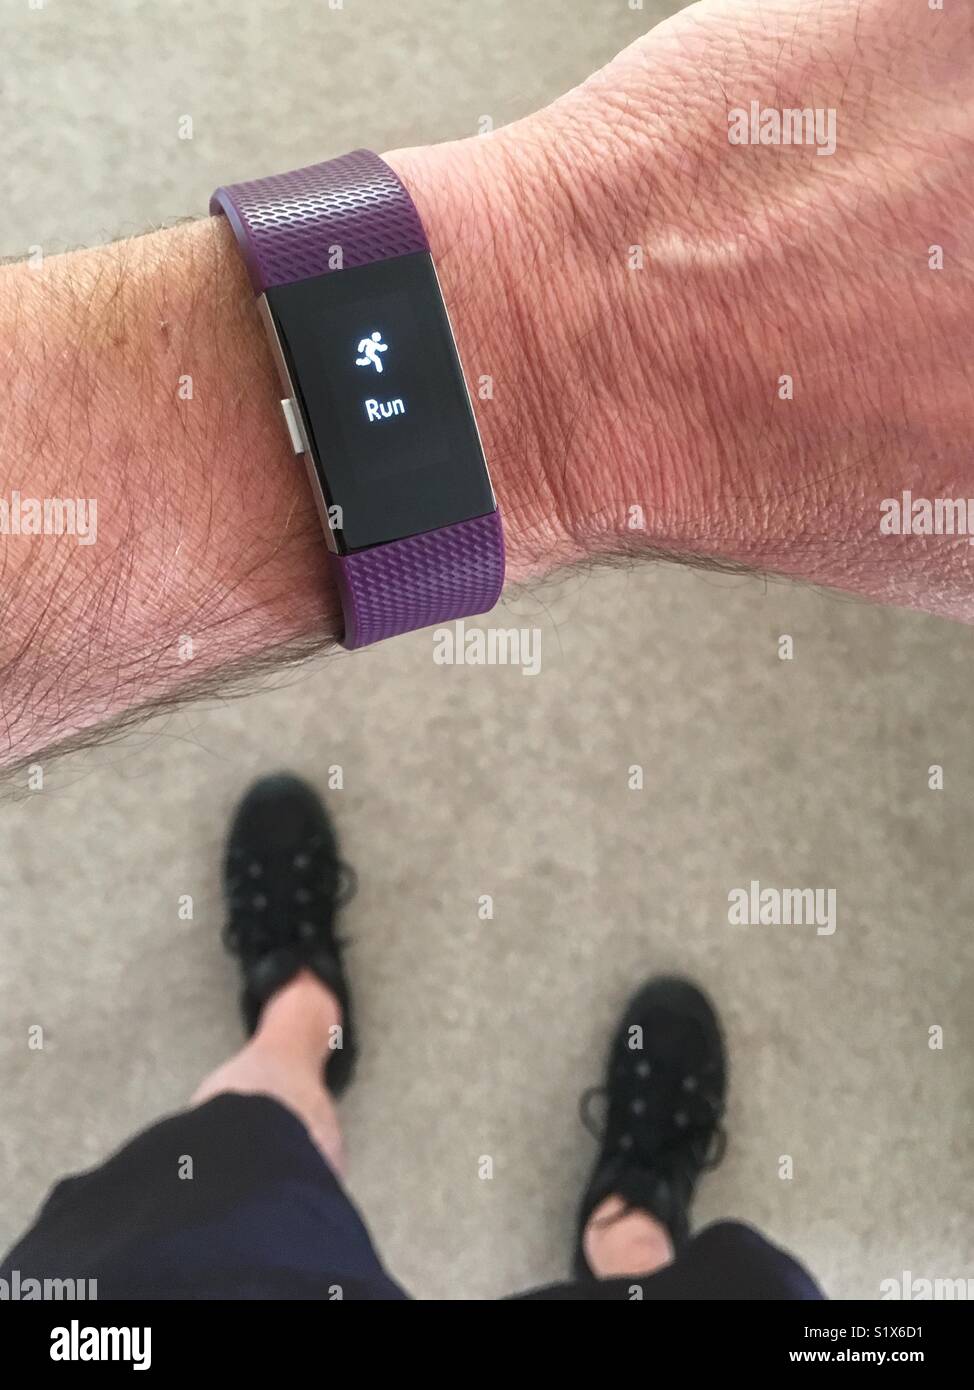 Fitbit set for a run Stock Photo